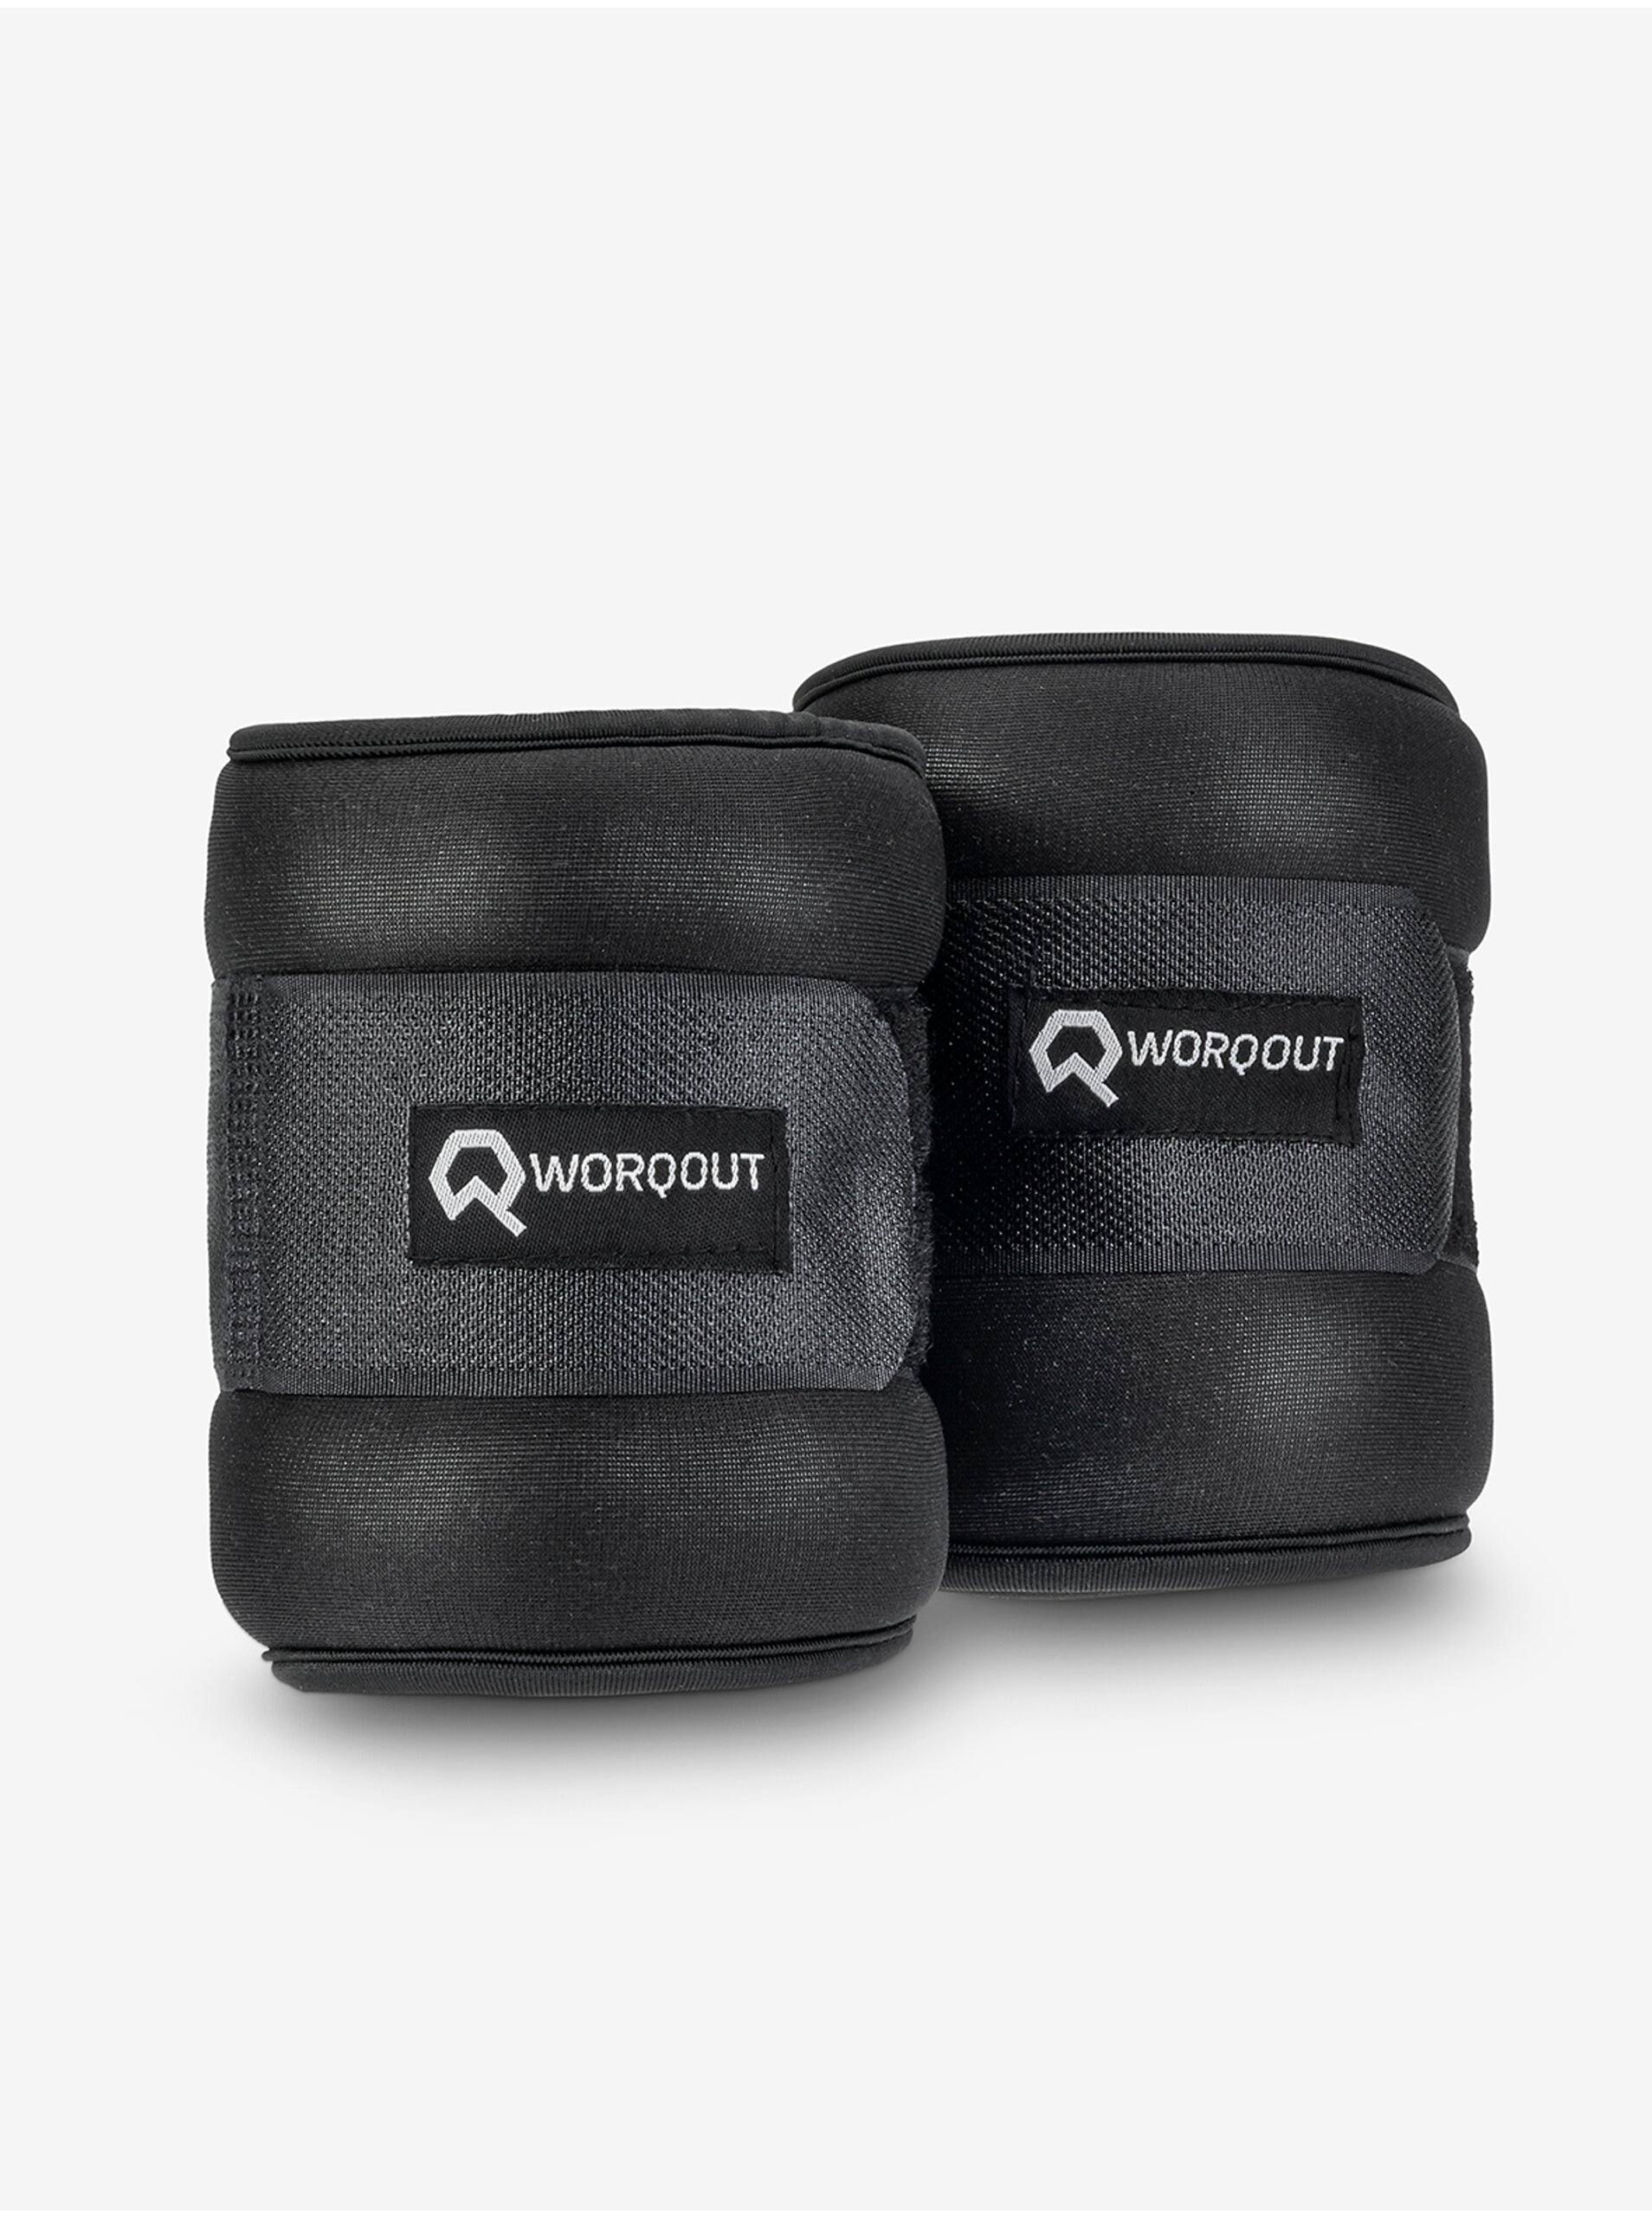 Black Wrist And Ankle Weights 1.1 Kg Worqout Wrist And Ankle We - Unisex